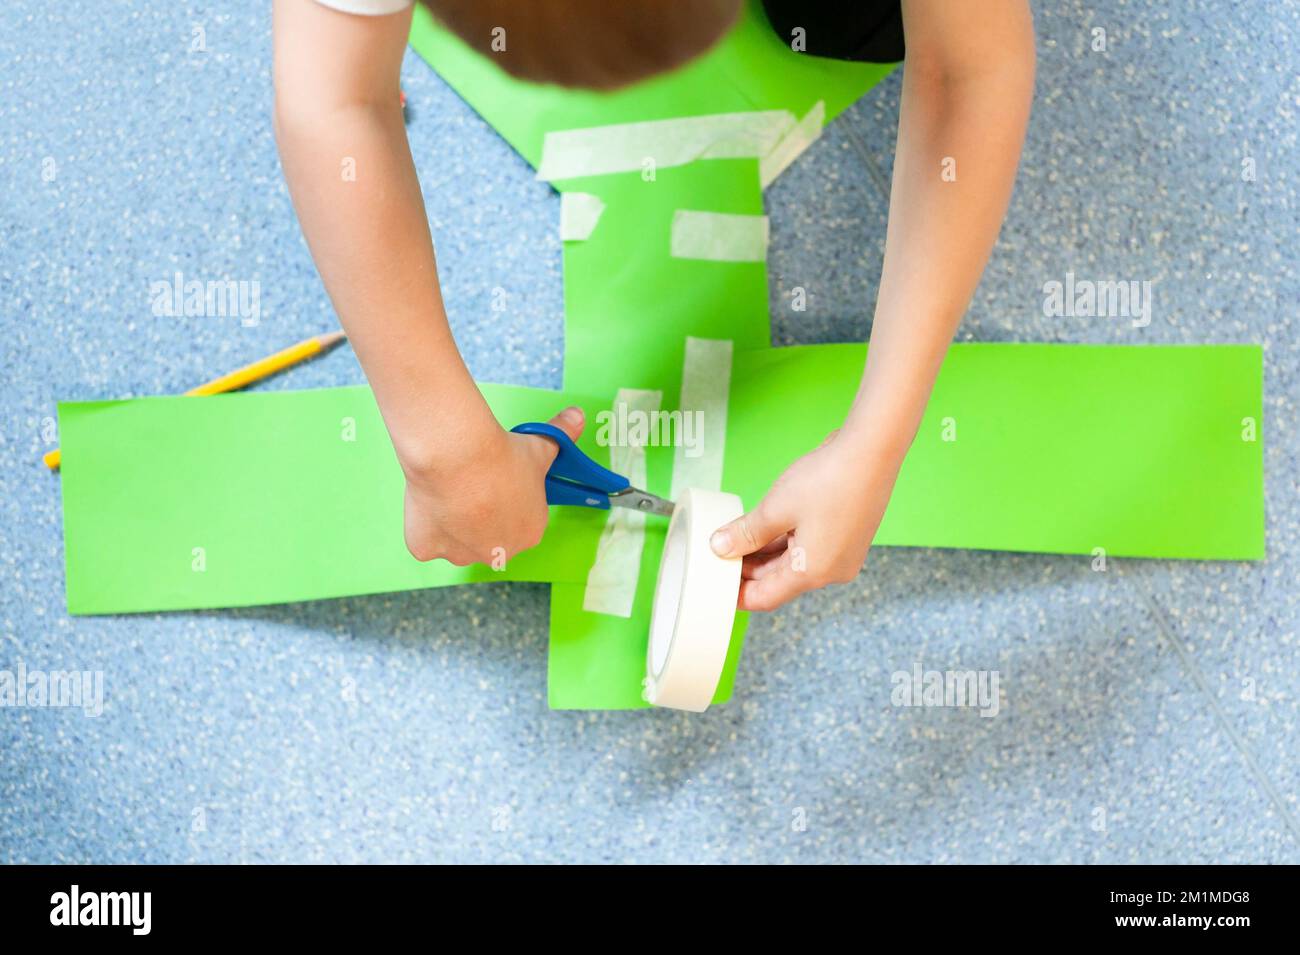 School child constructing with card scissors and tape Stock Photo